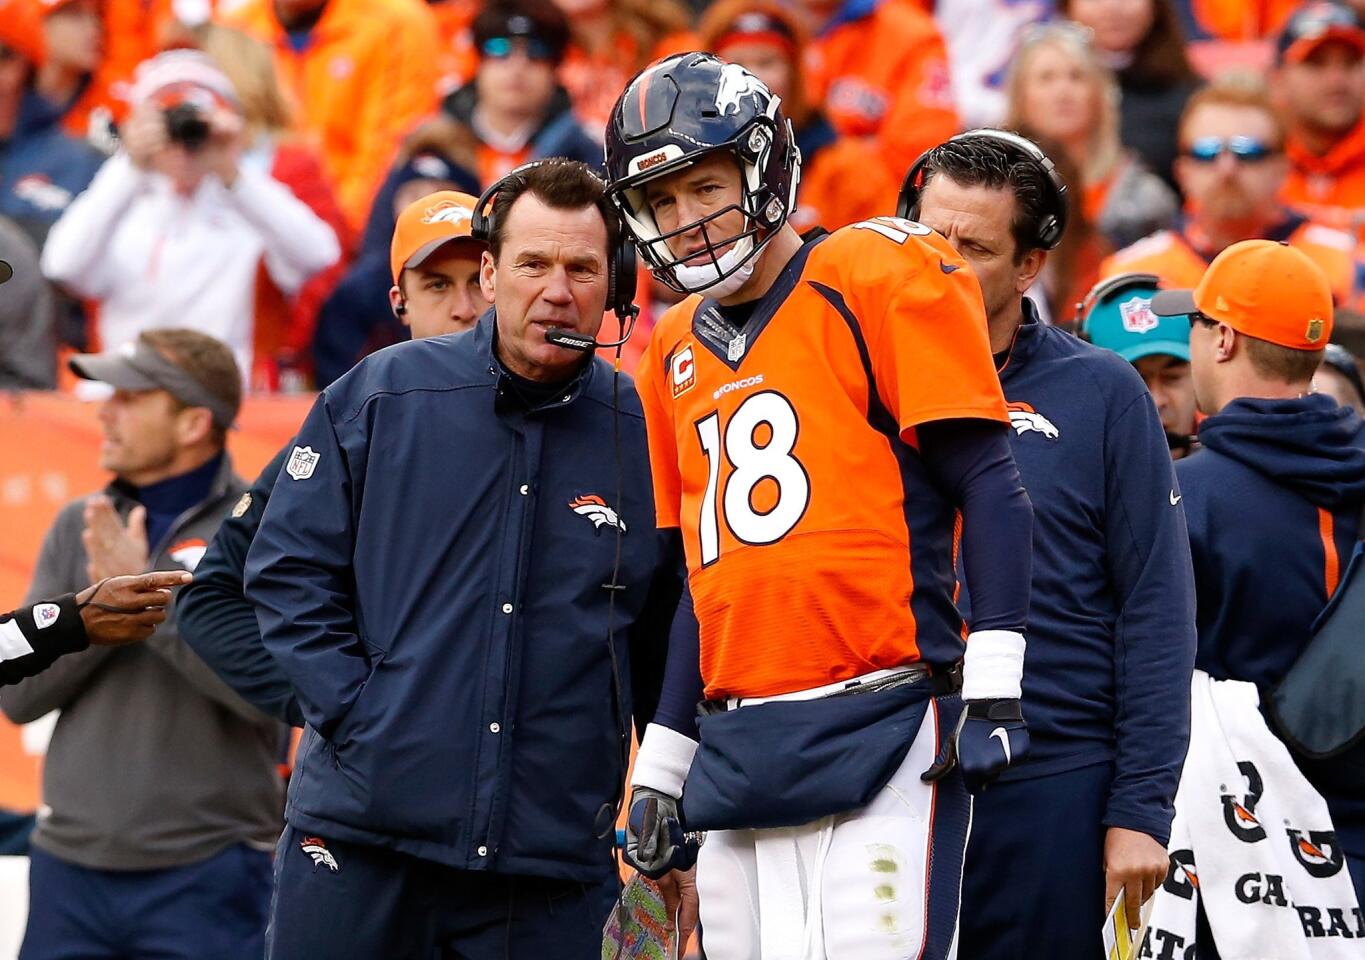 Broncos Coach Gary Kubiak and quarterback Peyton Manning talk during the first half of the AFC Championship game against the Patriots on Jan. 24.